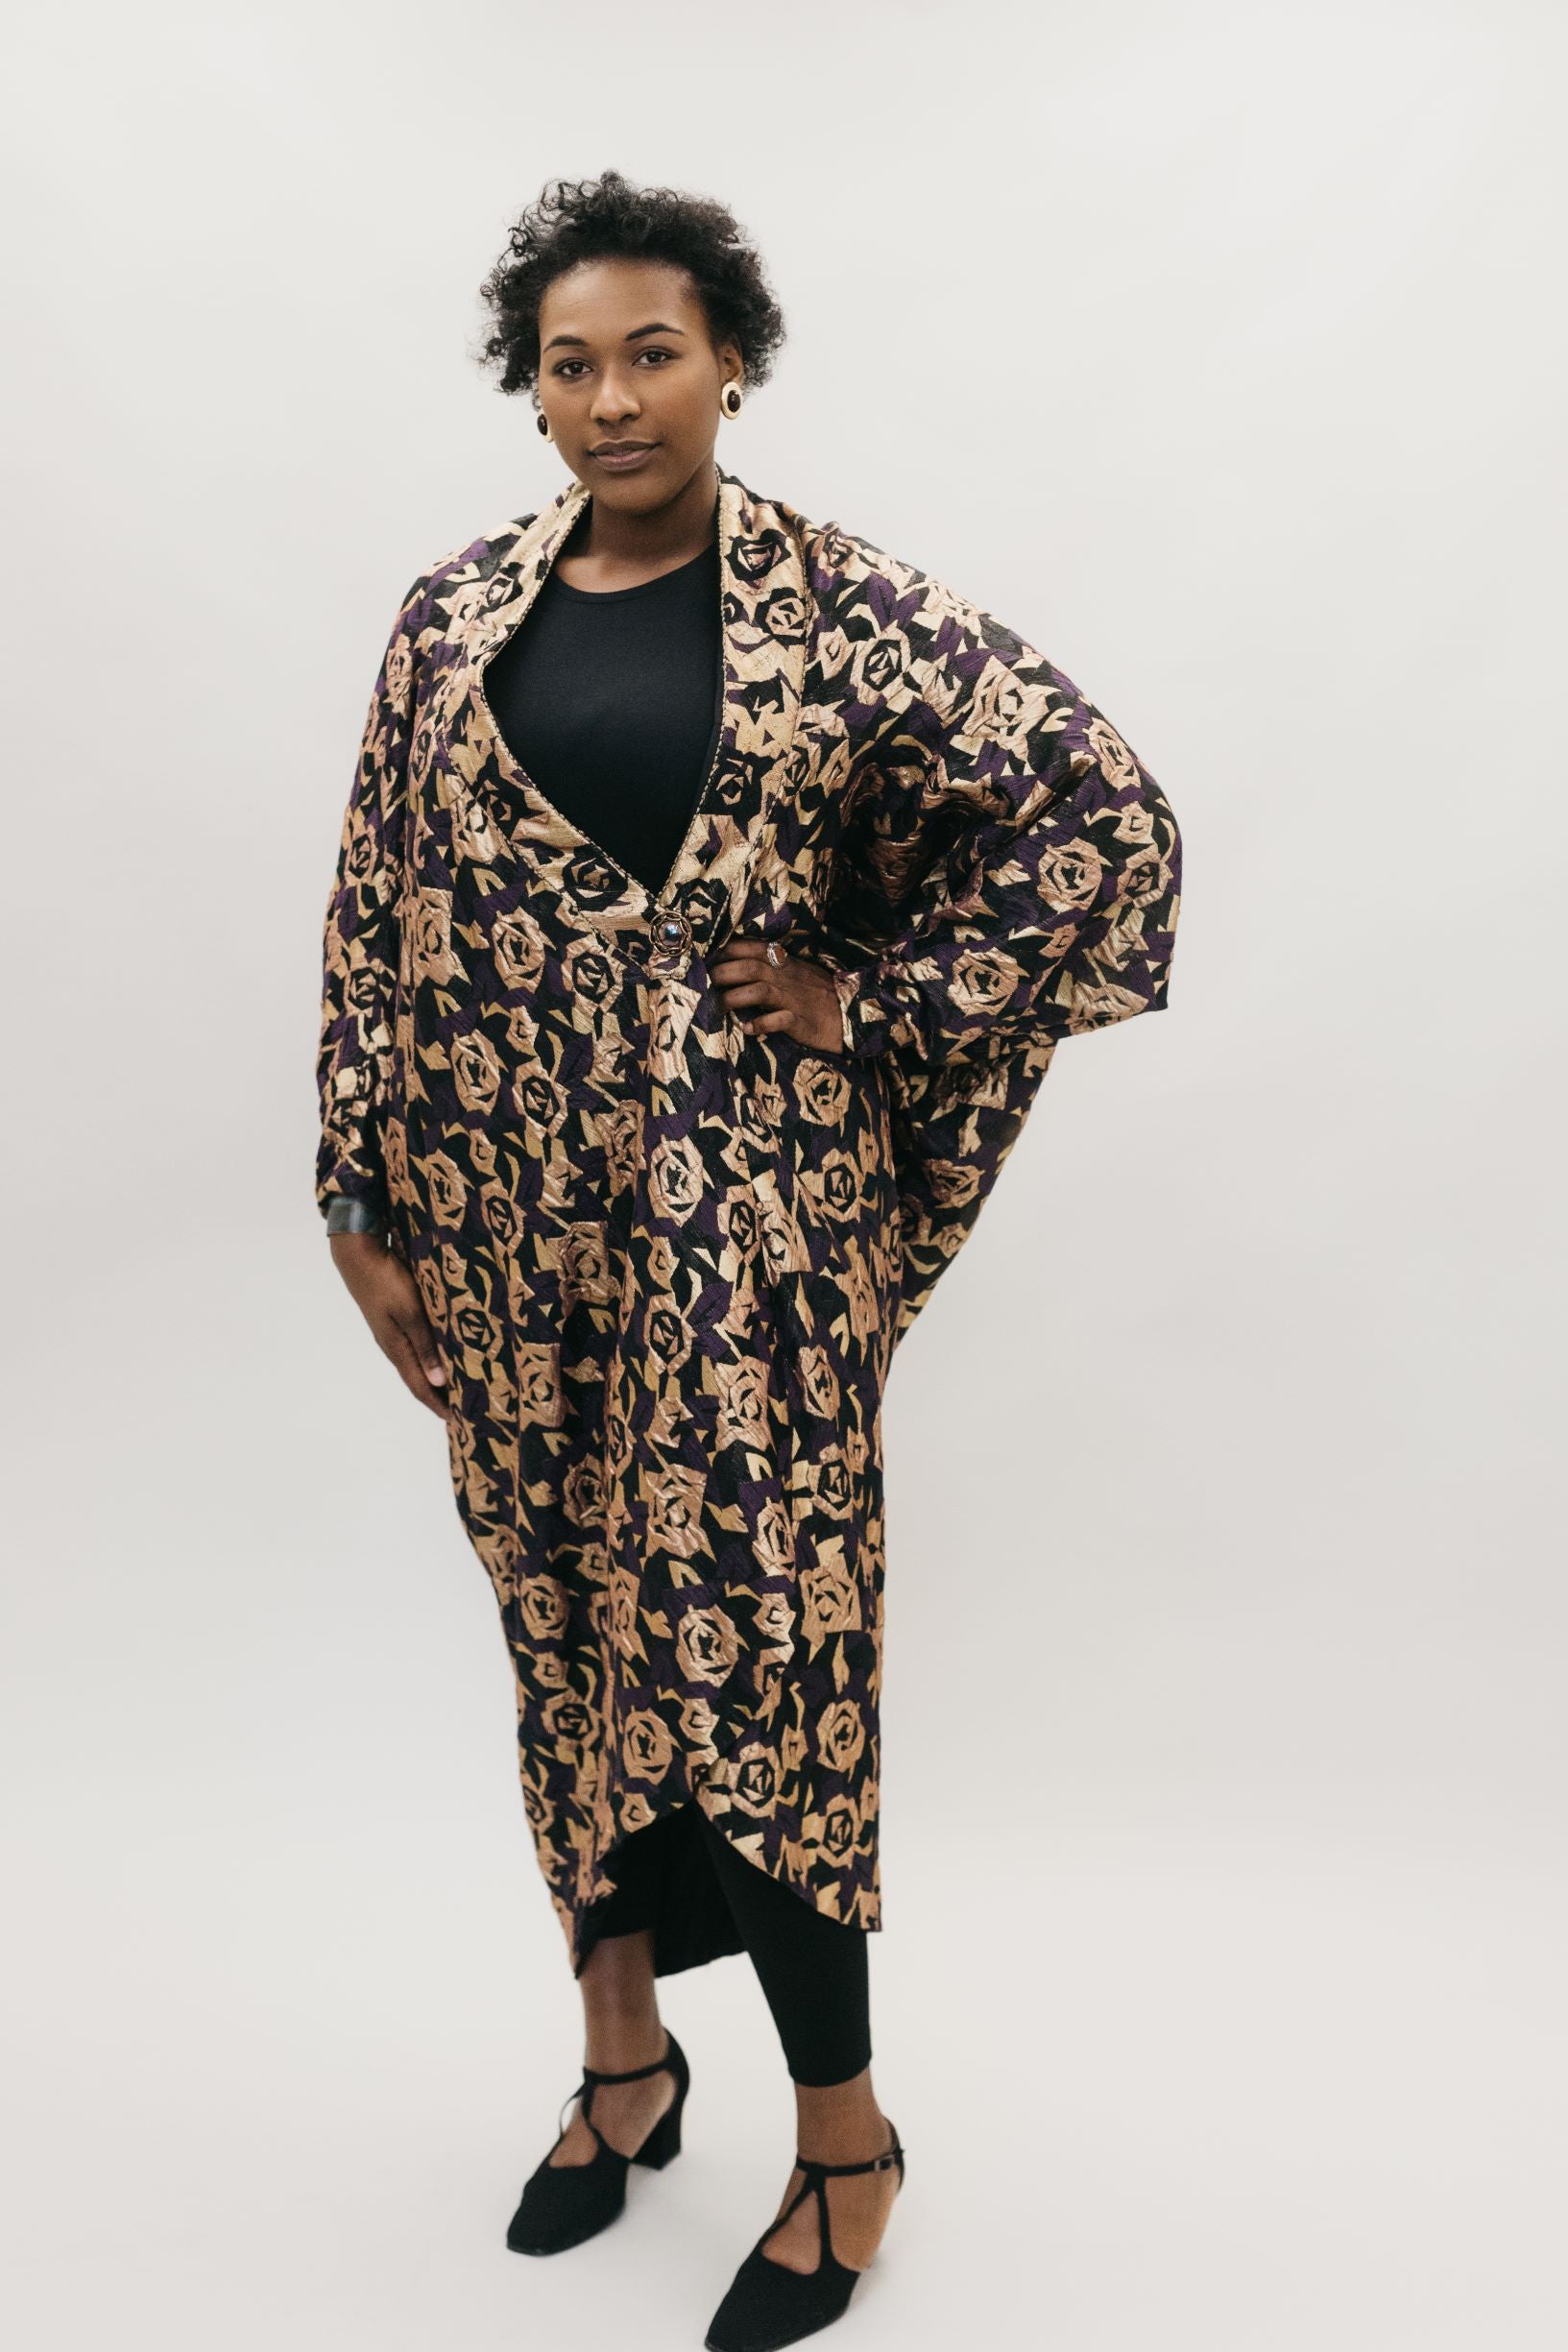 African American woman standing with left hand on her hipin front of a studio white backdrop wearing the 503 Poiret Cocoon Coat in a silk charmeuse fabric with gold roses as the pattern. She is also wearing black closed toed shoes. 